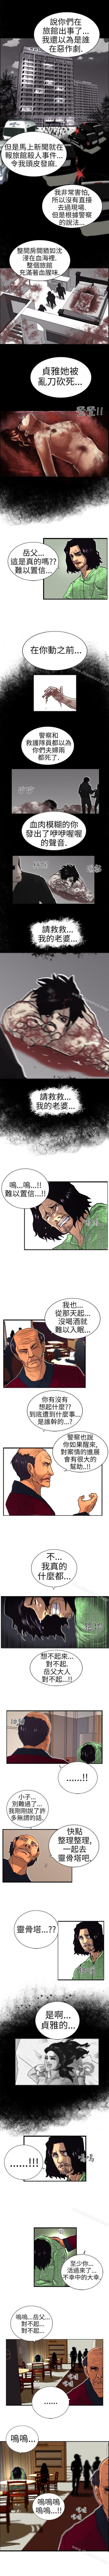 And 覺醒 1-34 Dildo - Page 8